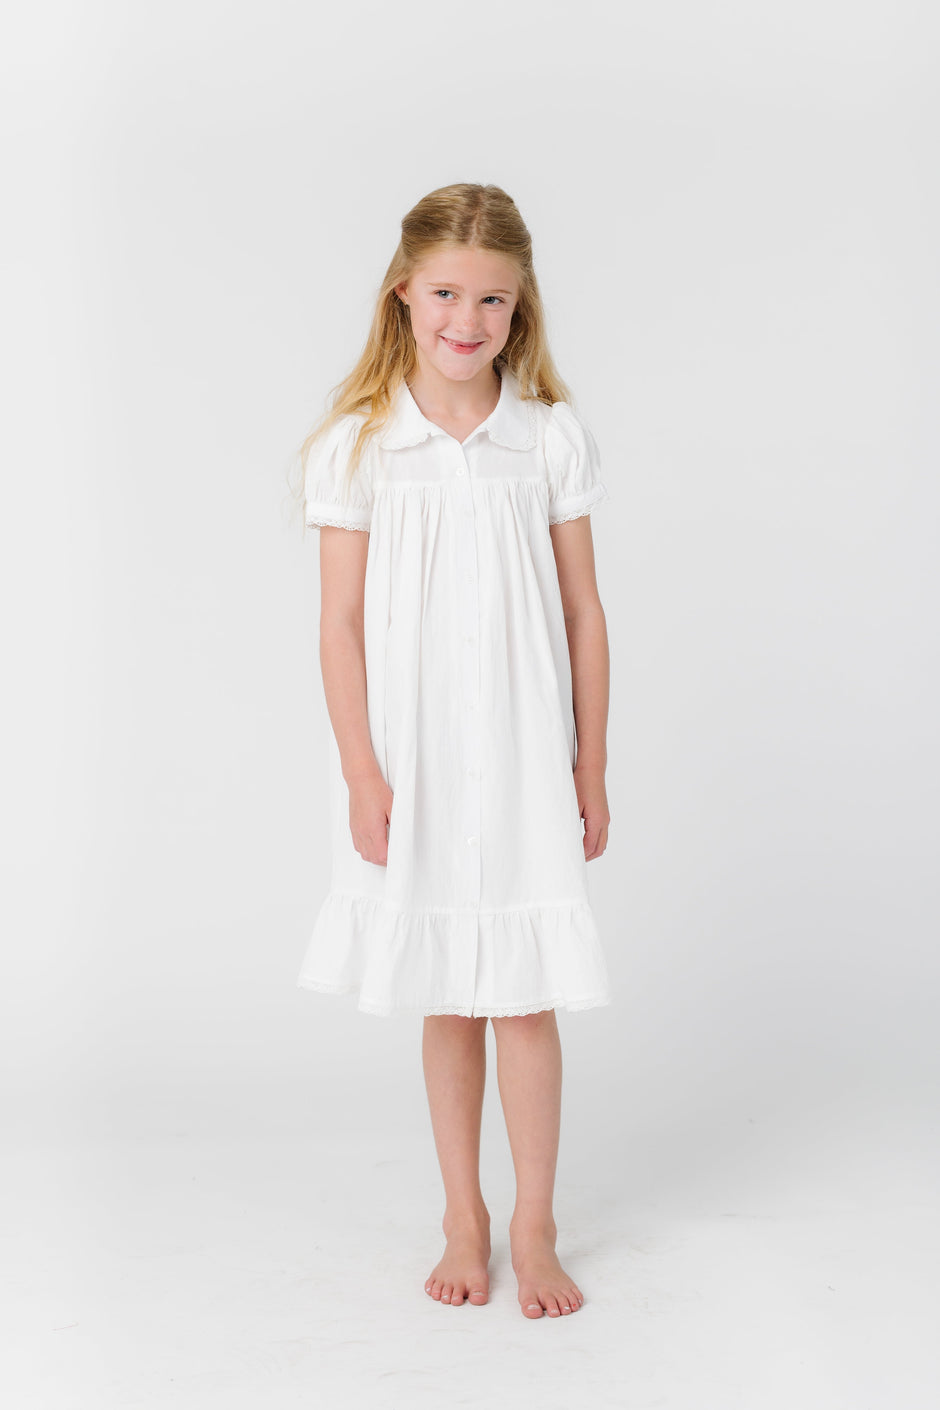 Shop Stylish Girls Dresses & Cute Kid's Clothes | Called to Surf